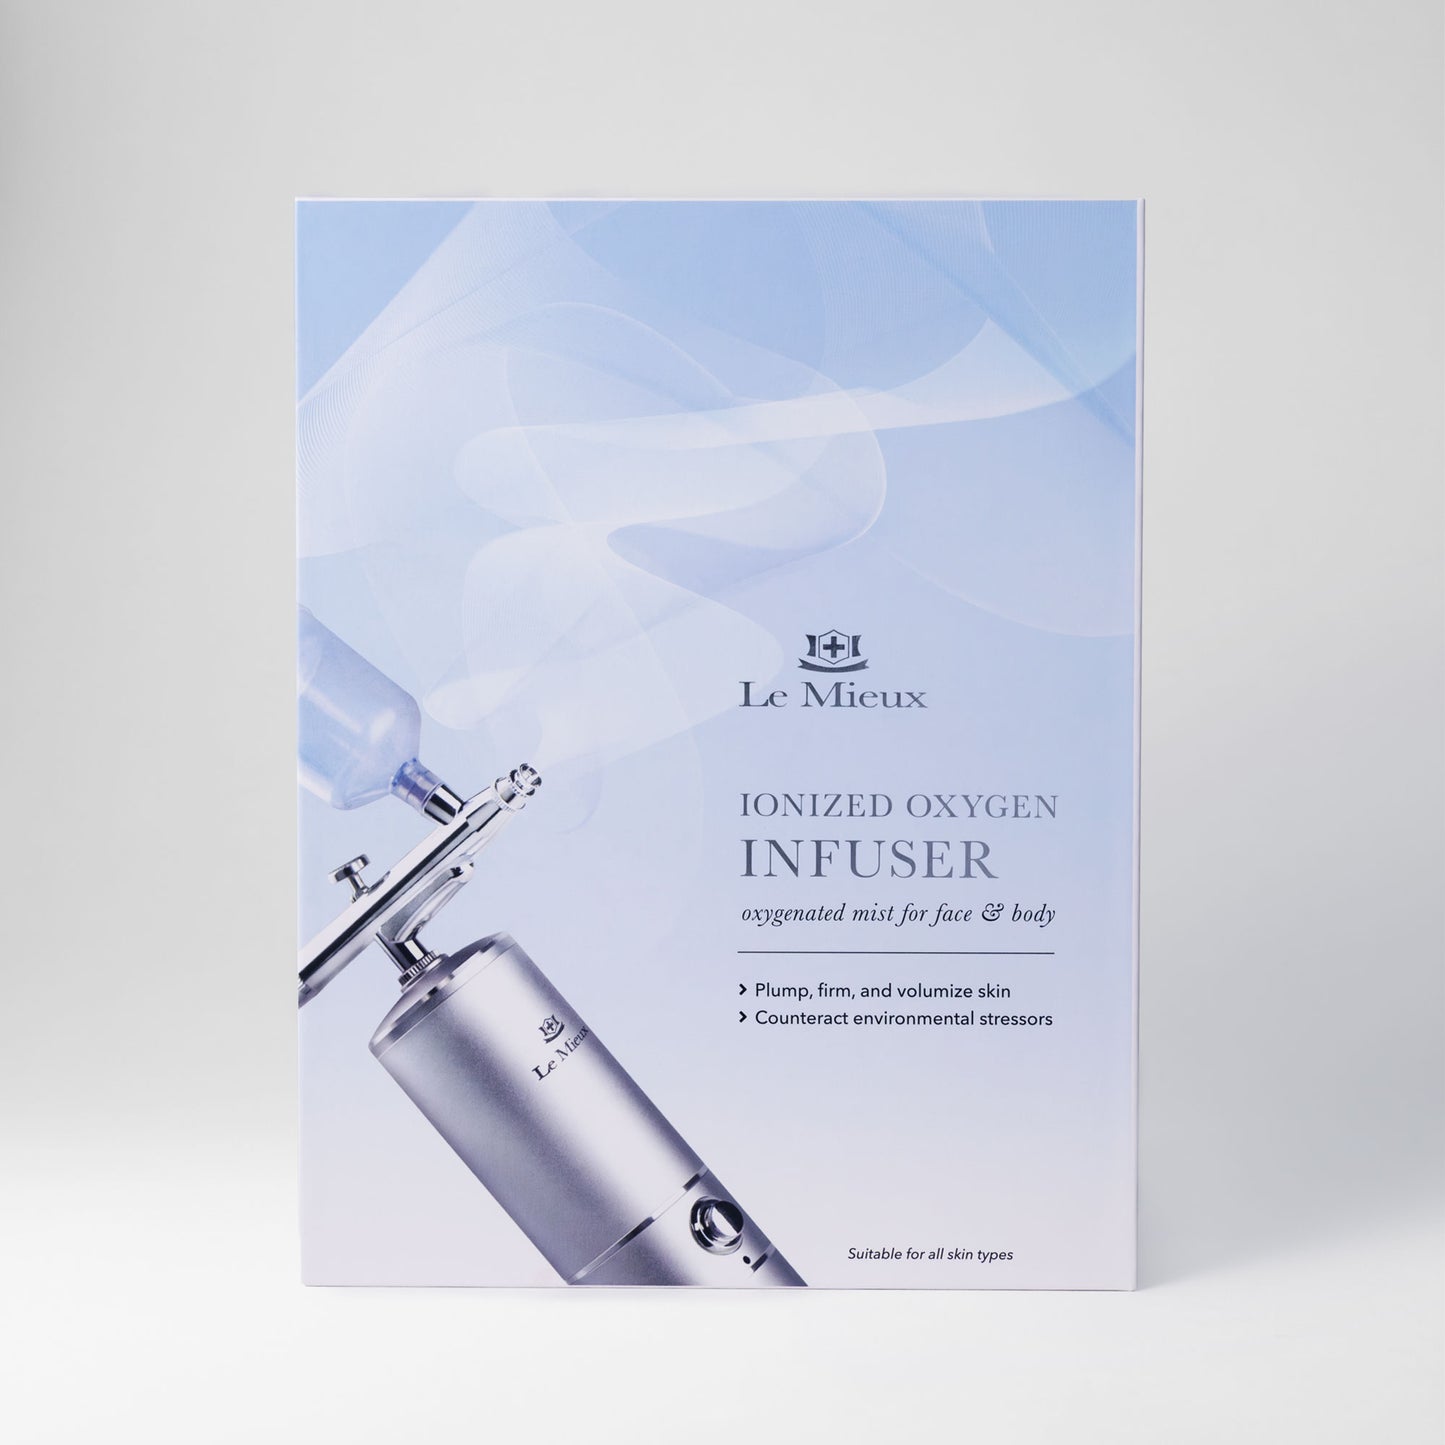 IONIZED OXYGEN INFUSER